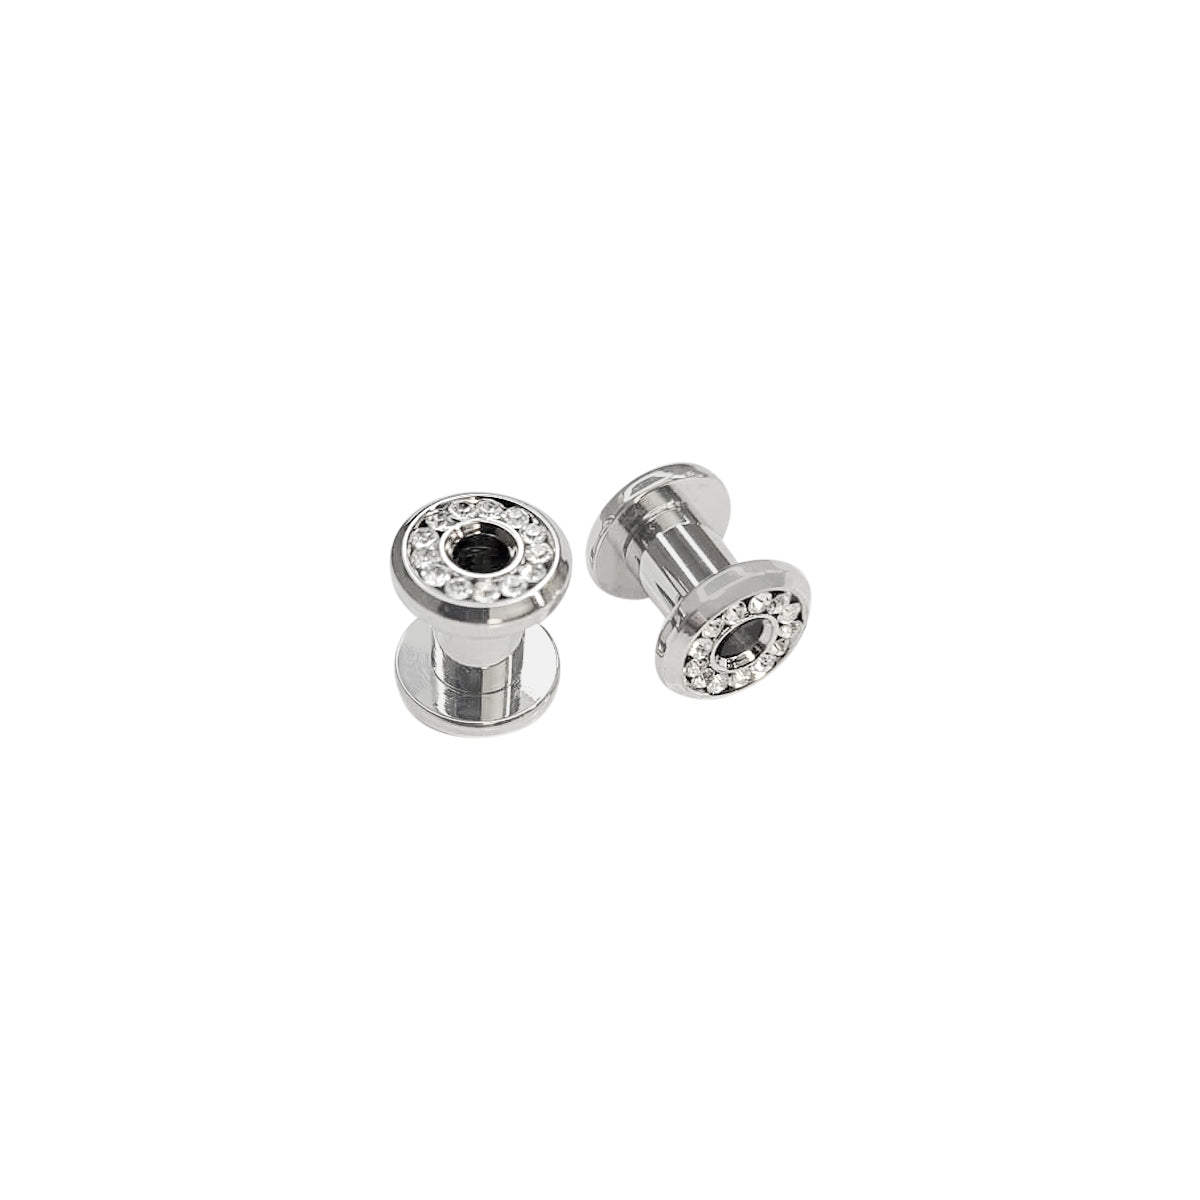 Pair of Screw Fit Ear Gauge Plugs with Clear CZ Gems Surgical Steel